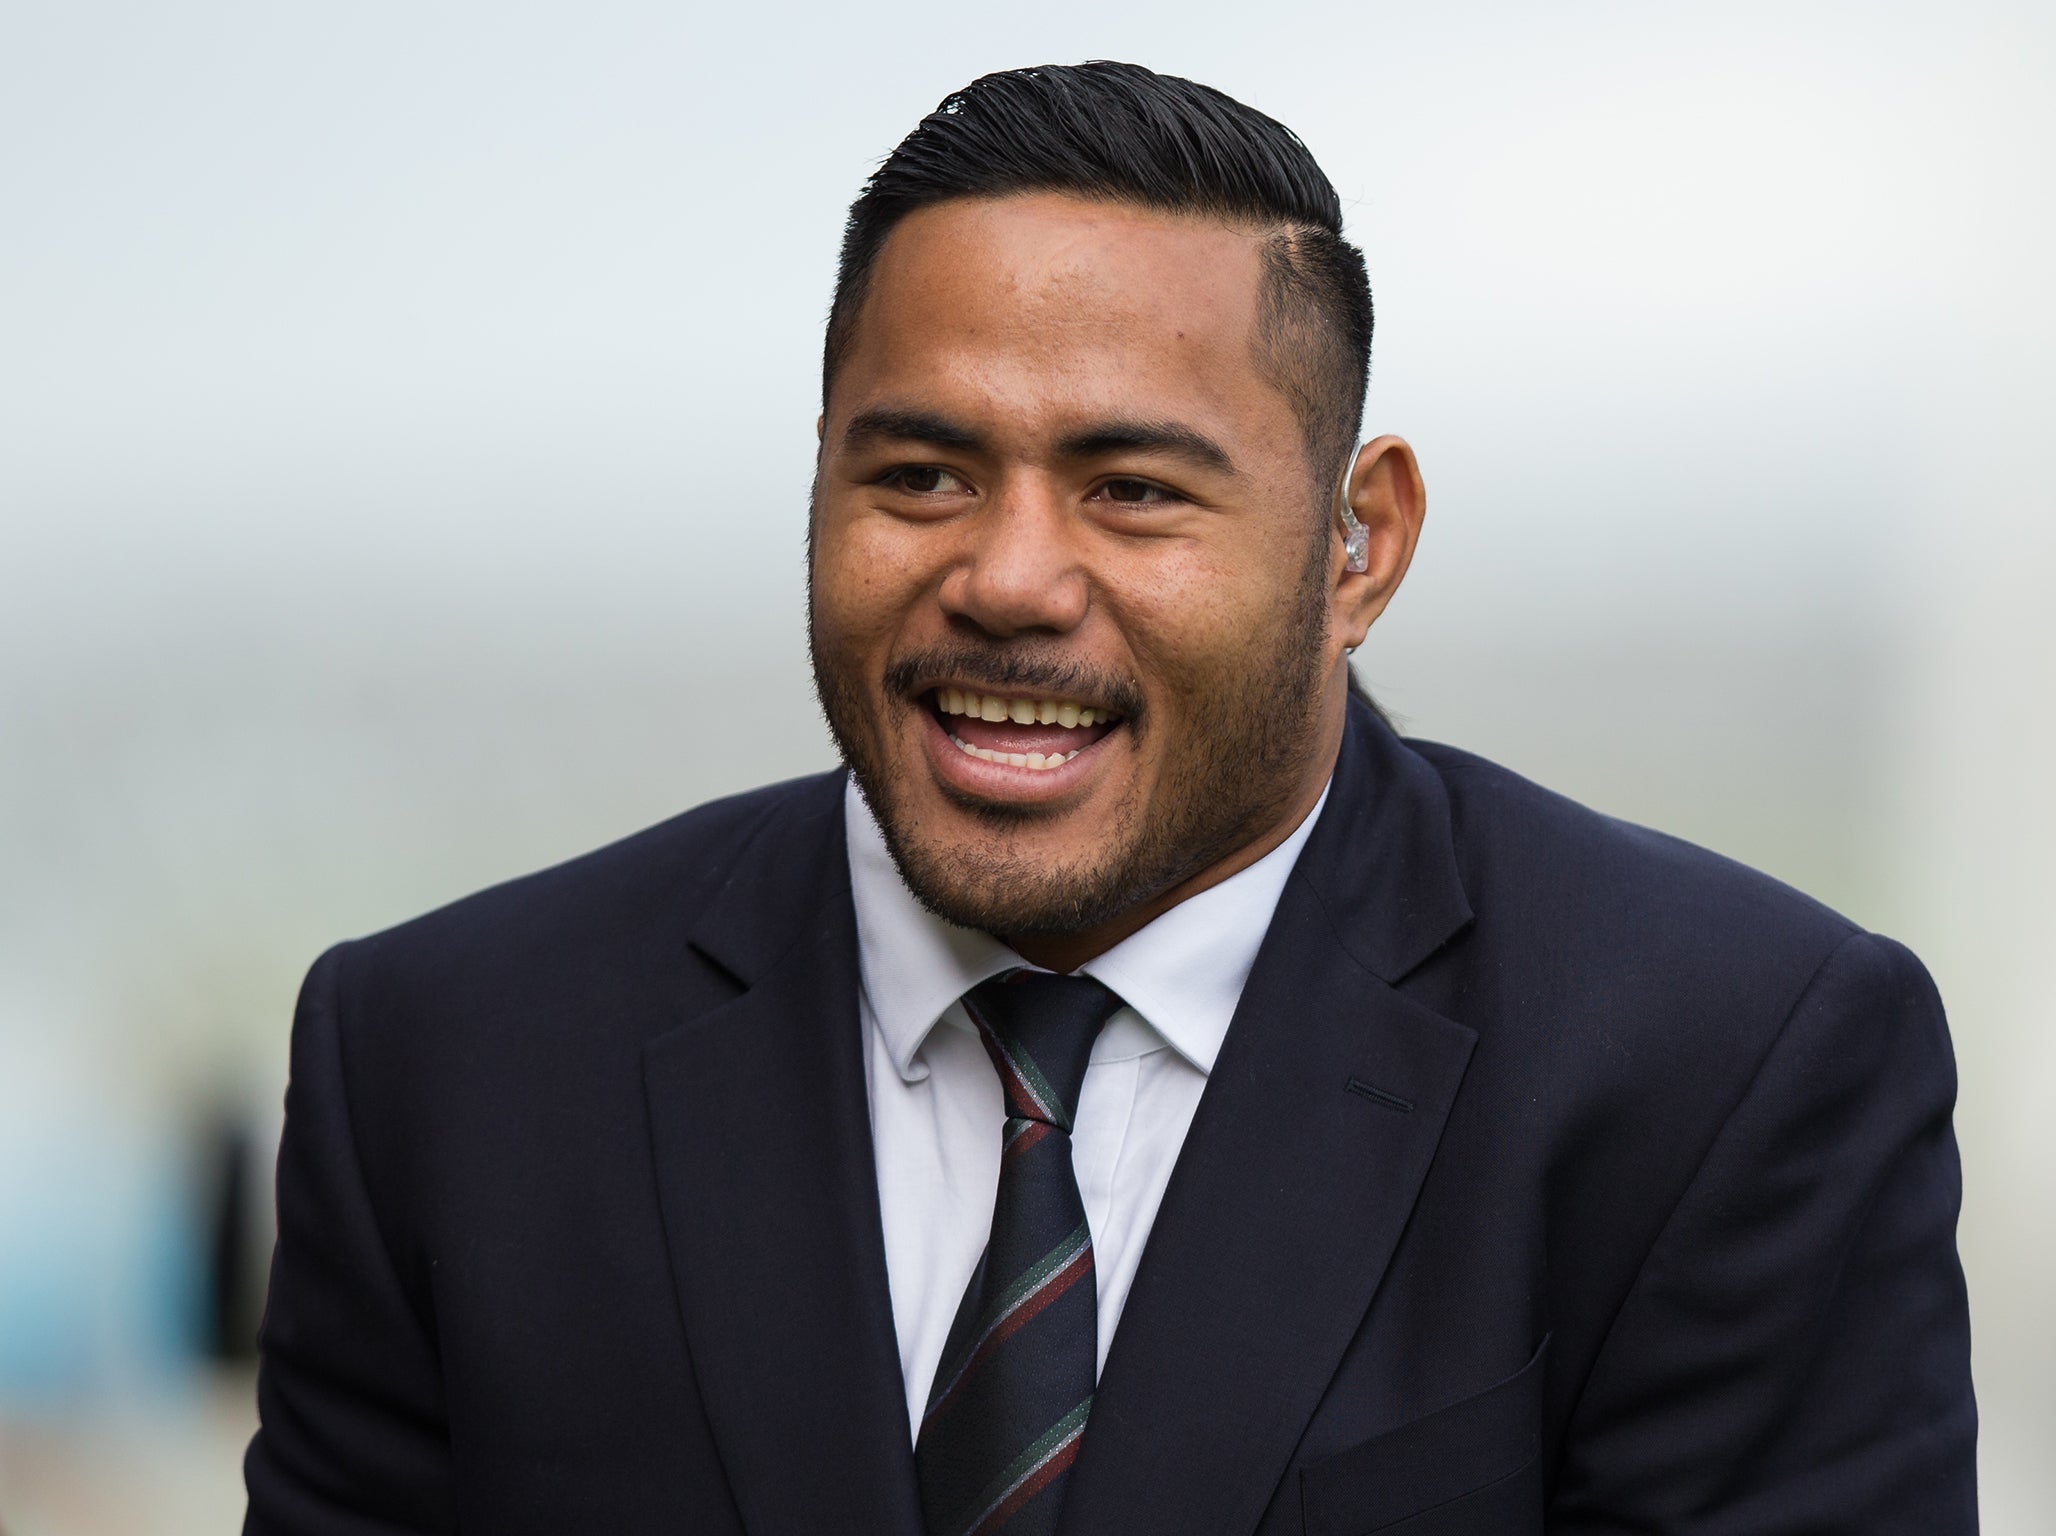 Tuilagi is not due back from his latest lay-off until mid-December